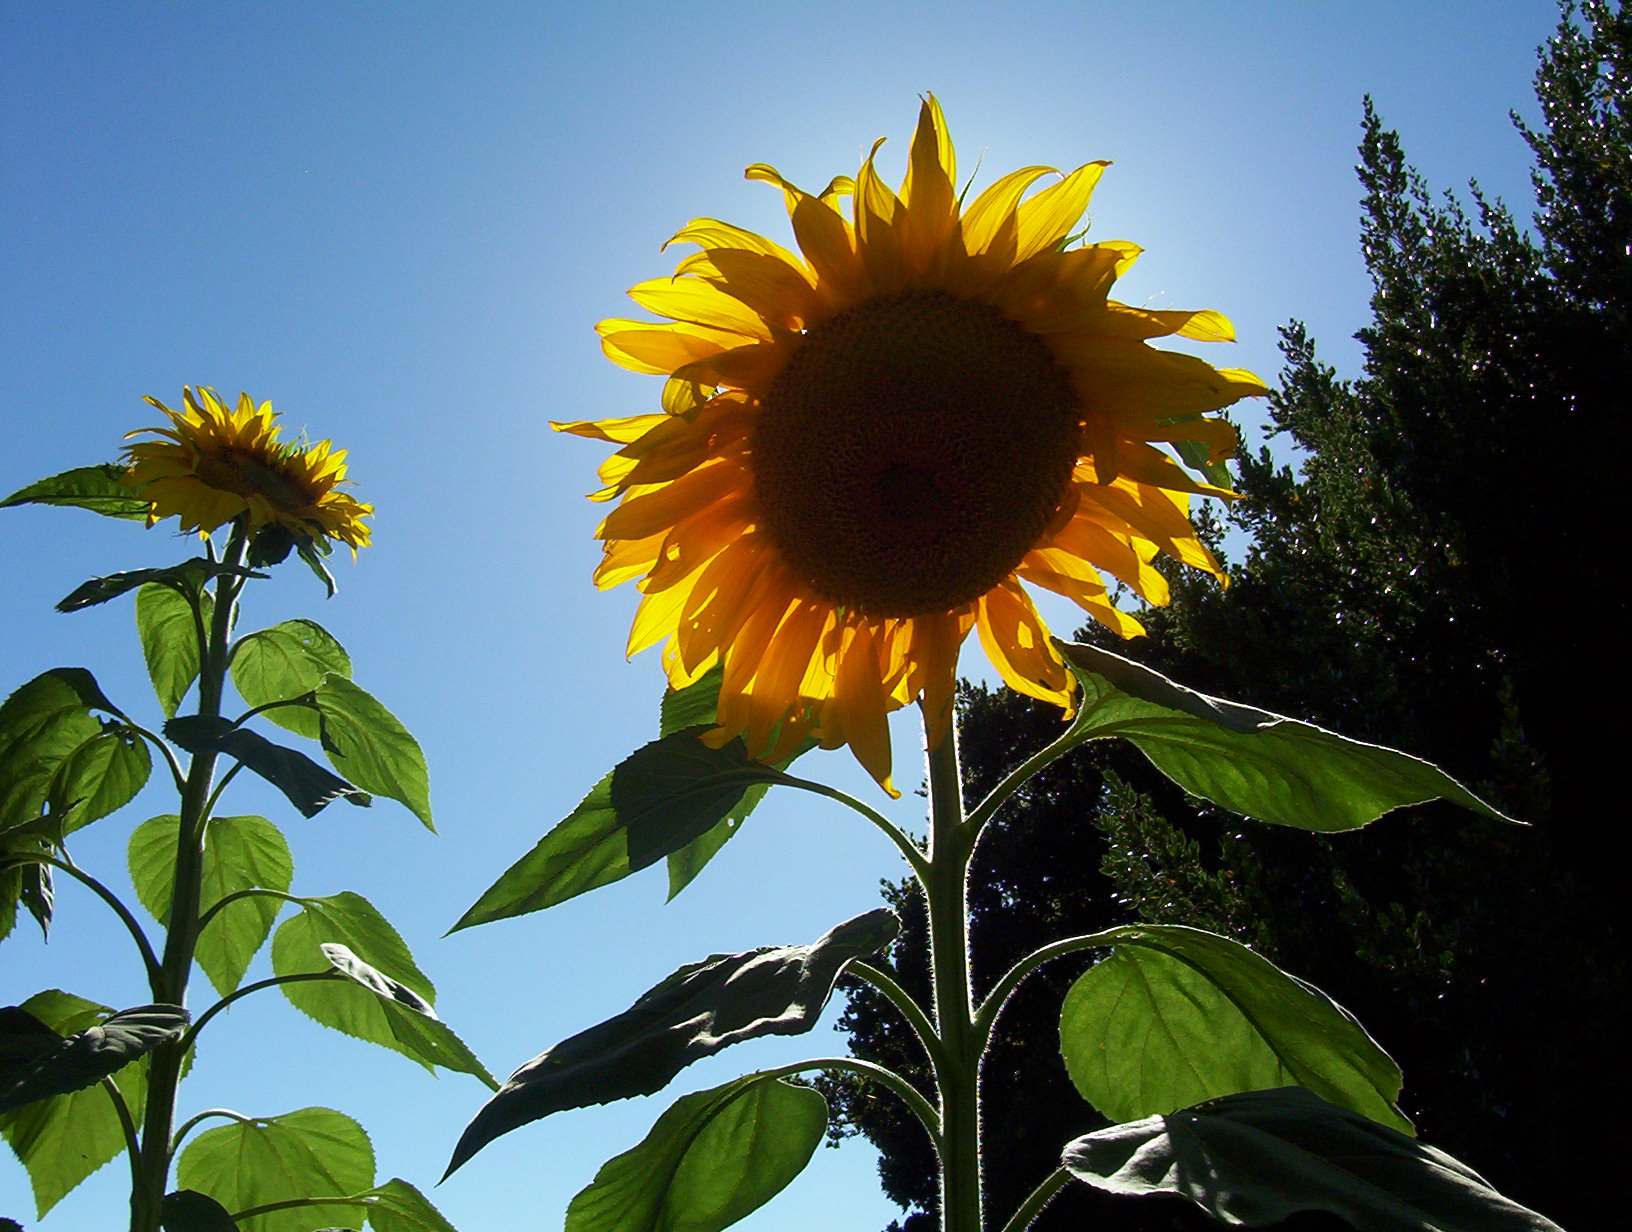 What is the best environment for sunflowers?